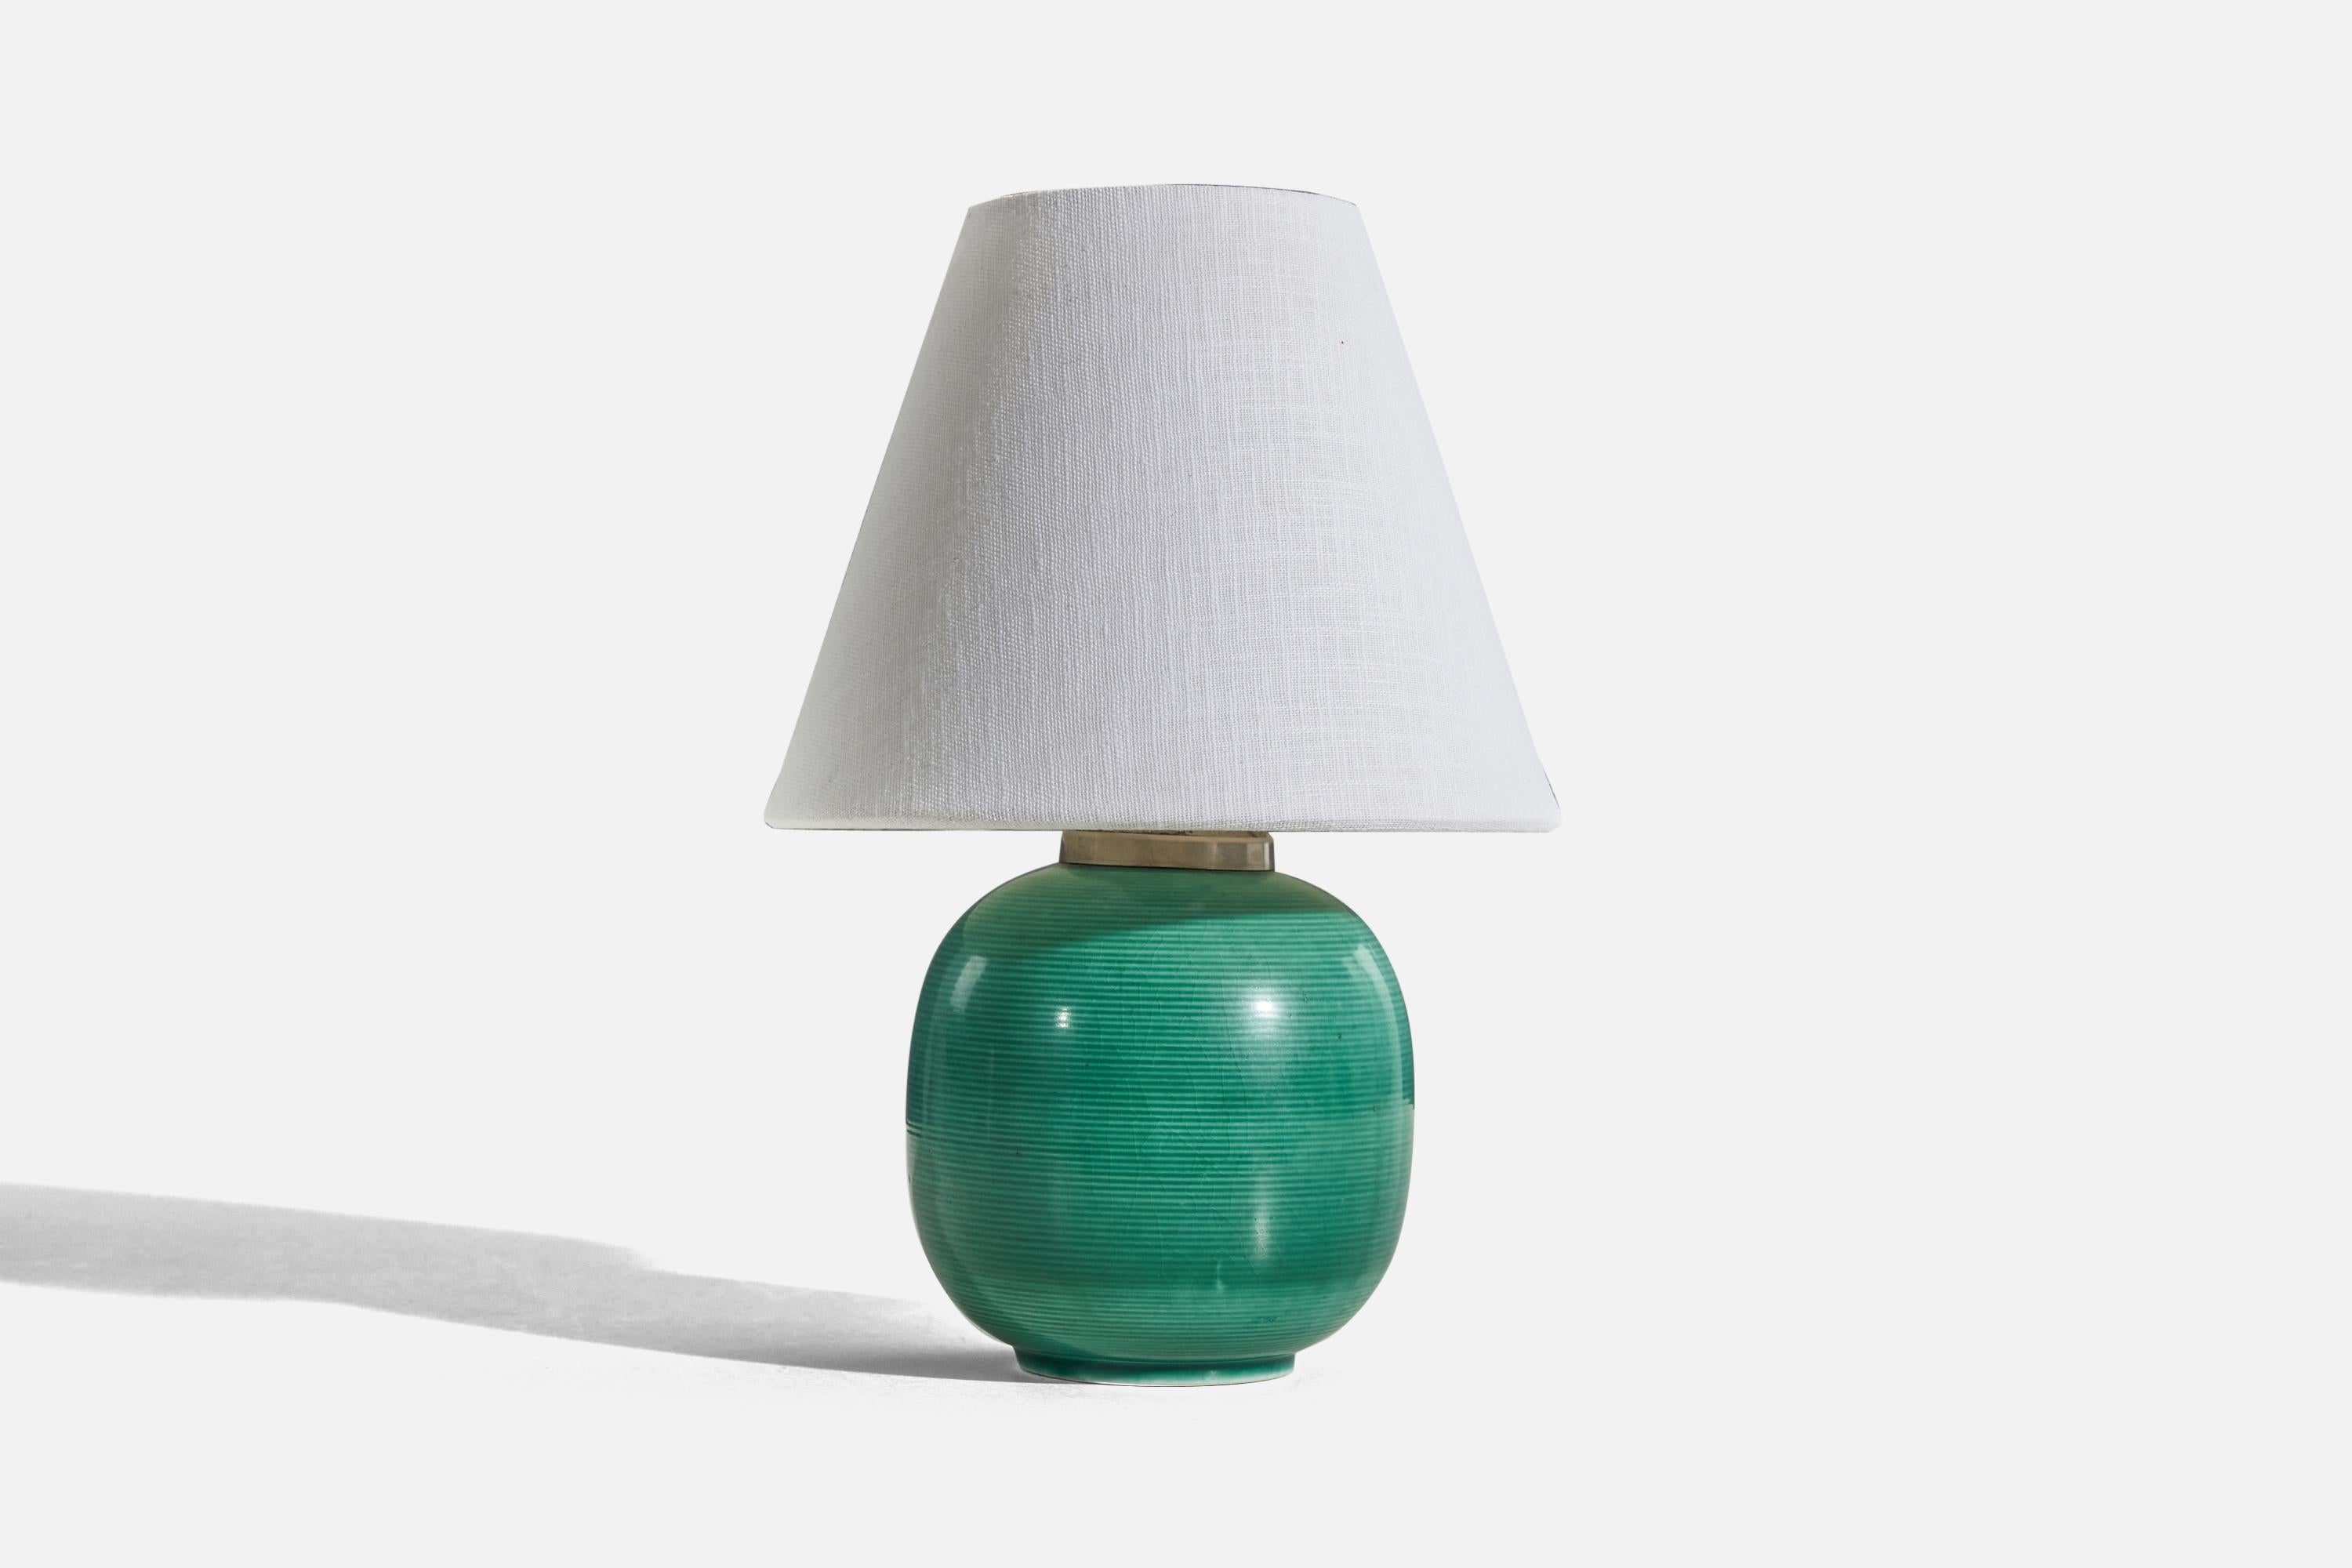 A green, glazed stoneware table lamp designed and produced by Rörstrand, Sweden, 1940s. 

Sold without lampshade. 
Dimensions of Lamp (inches) : 8.75 x 5.25 x 5.25 (H x W x D)
Dimensions of Shade (inches) : 4 x 8 x 6.5 (T x B x S)
Dimension of